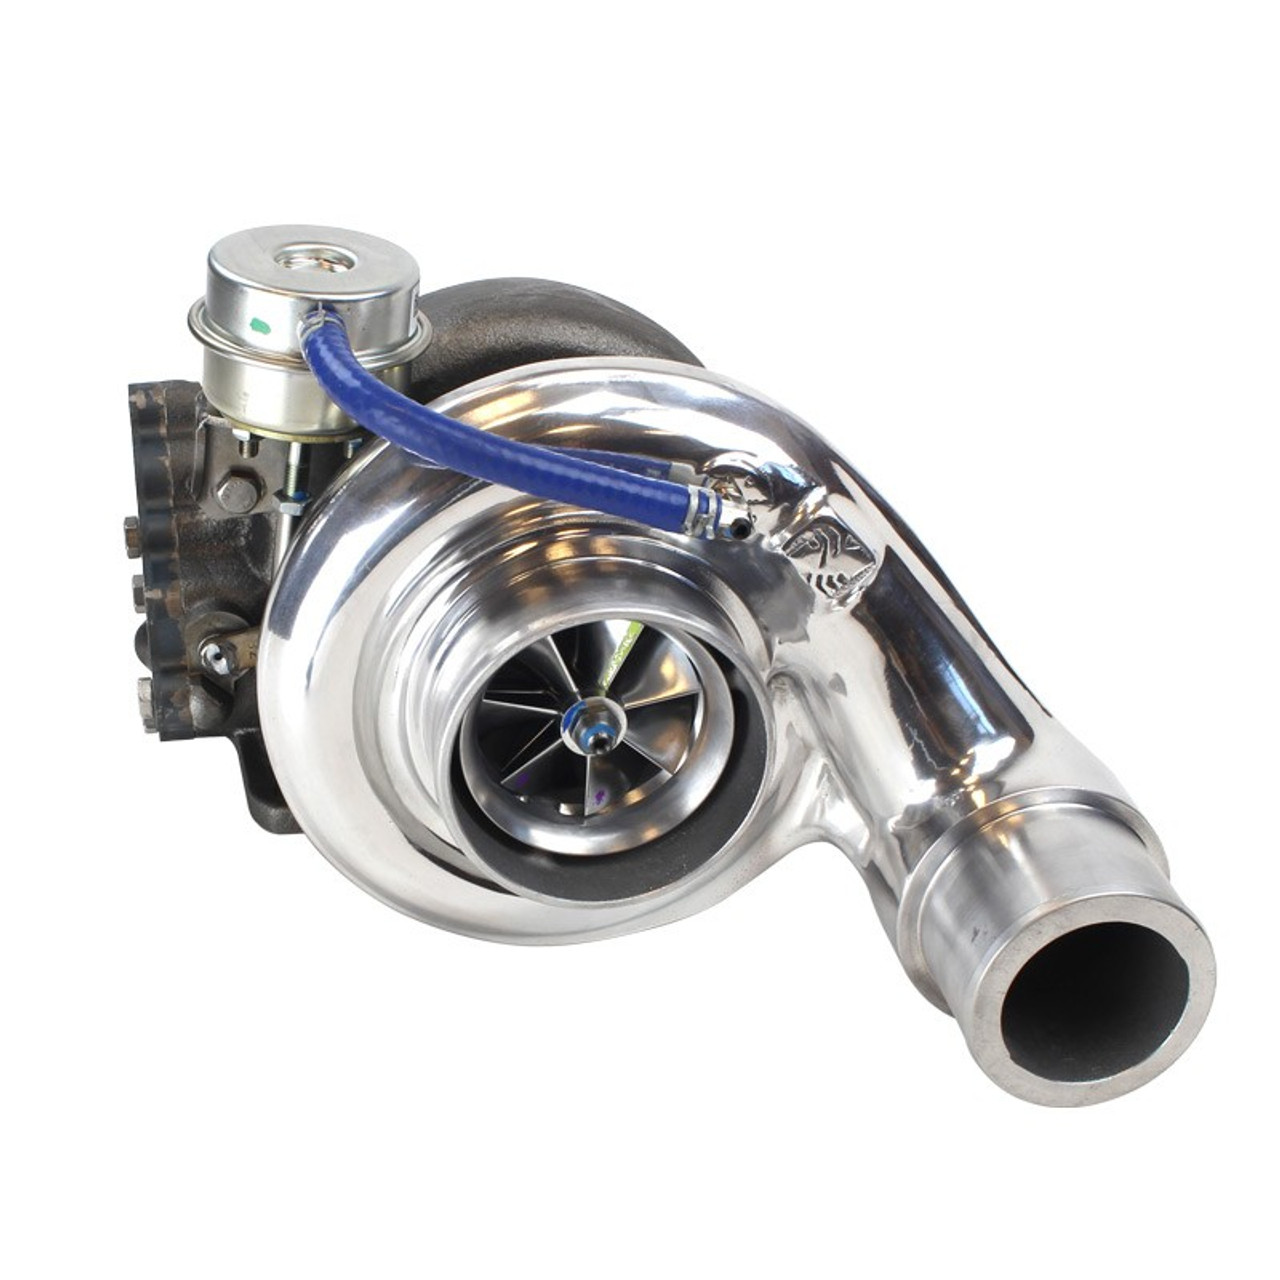 INDUSTRIAL INJECTION SILVER BULLET PHATSHAFT 62 TURBO 2003-2004 DODGE 5.9L CUMMINS (II362241741A)Angle Turbo View